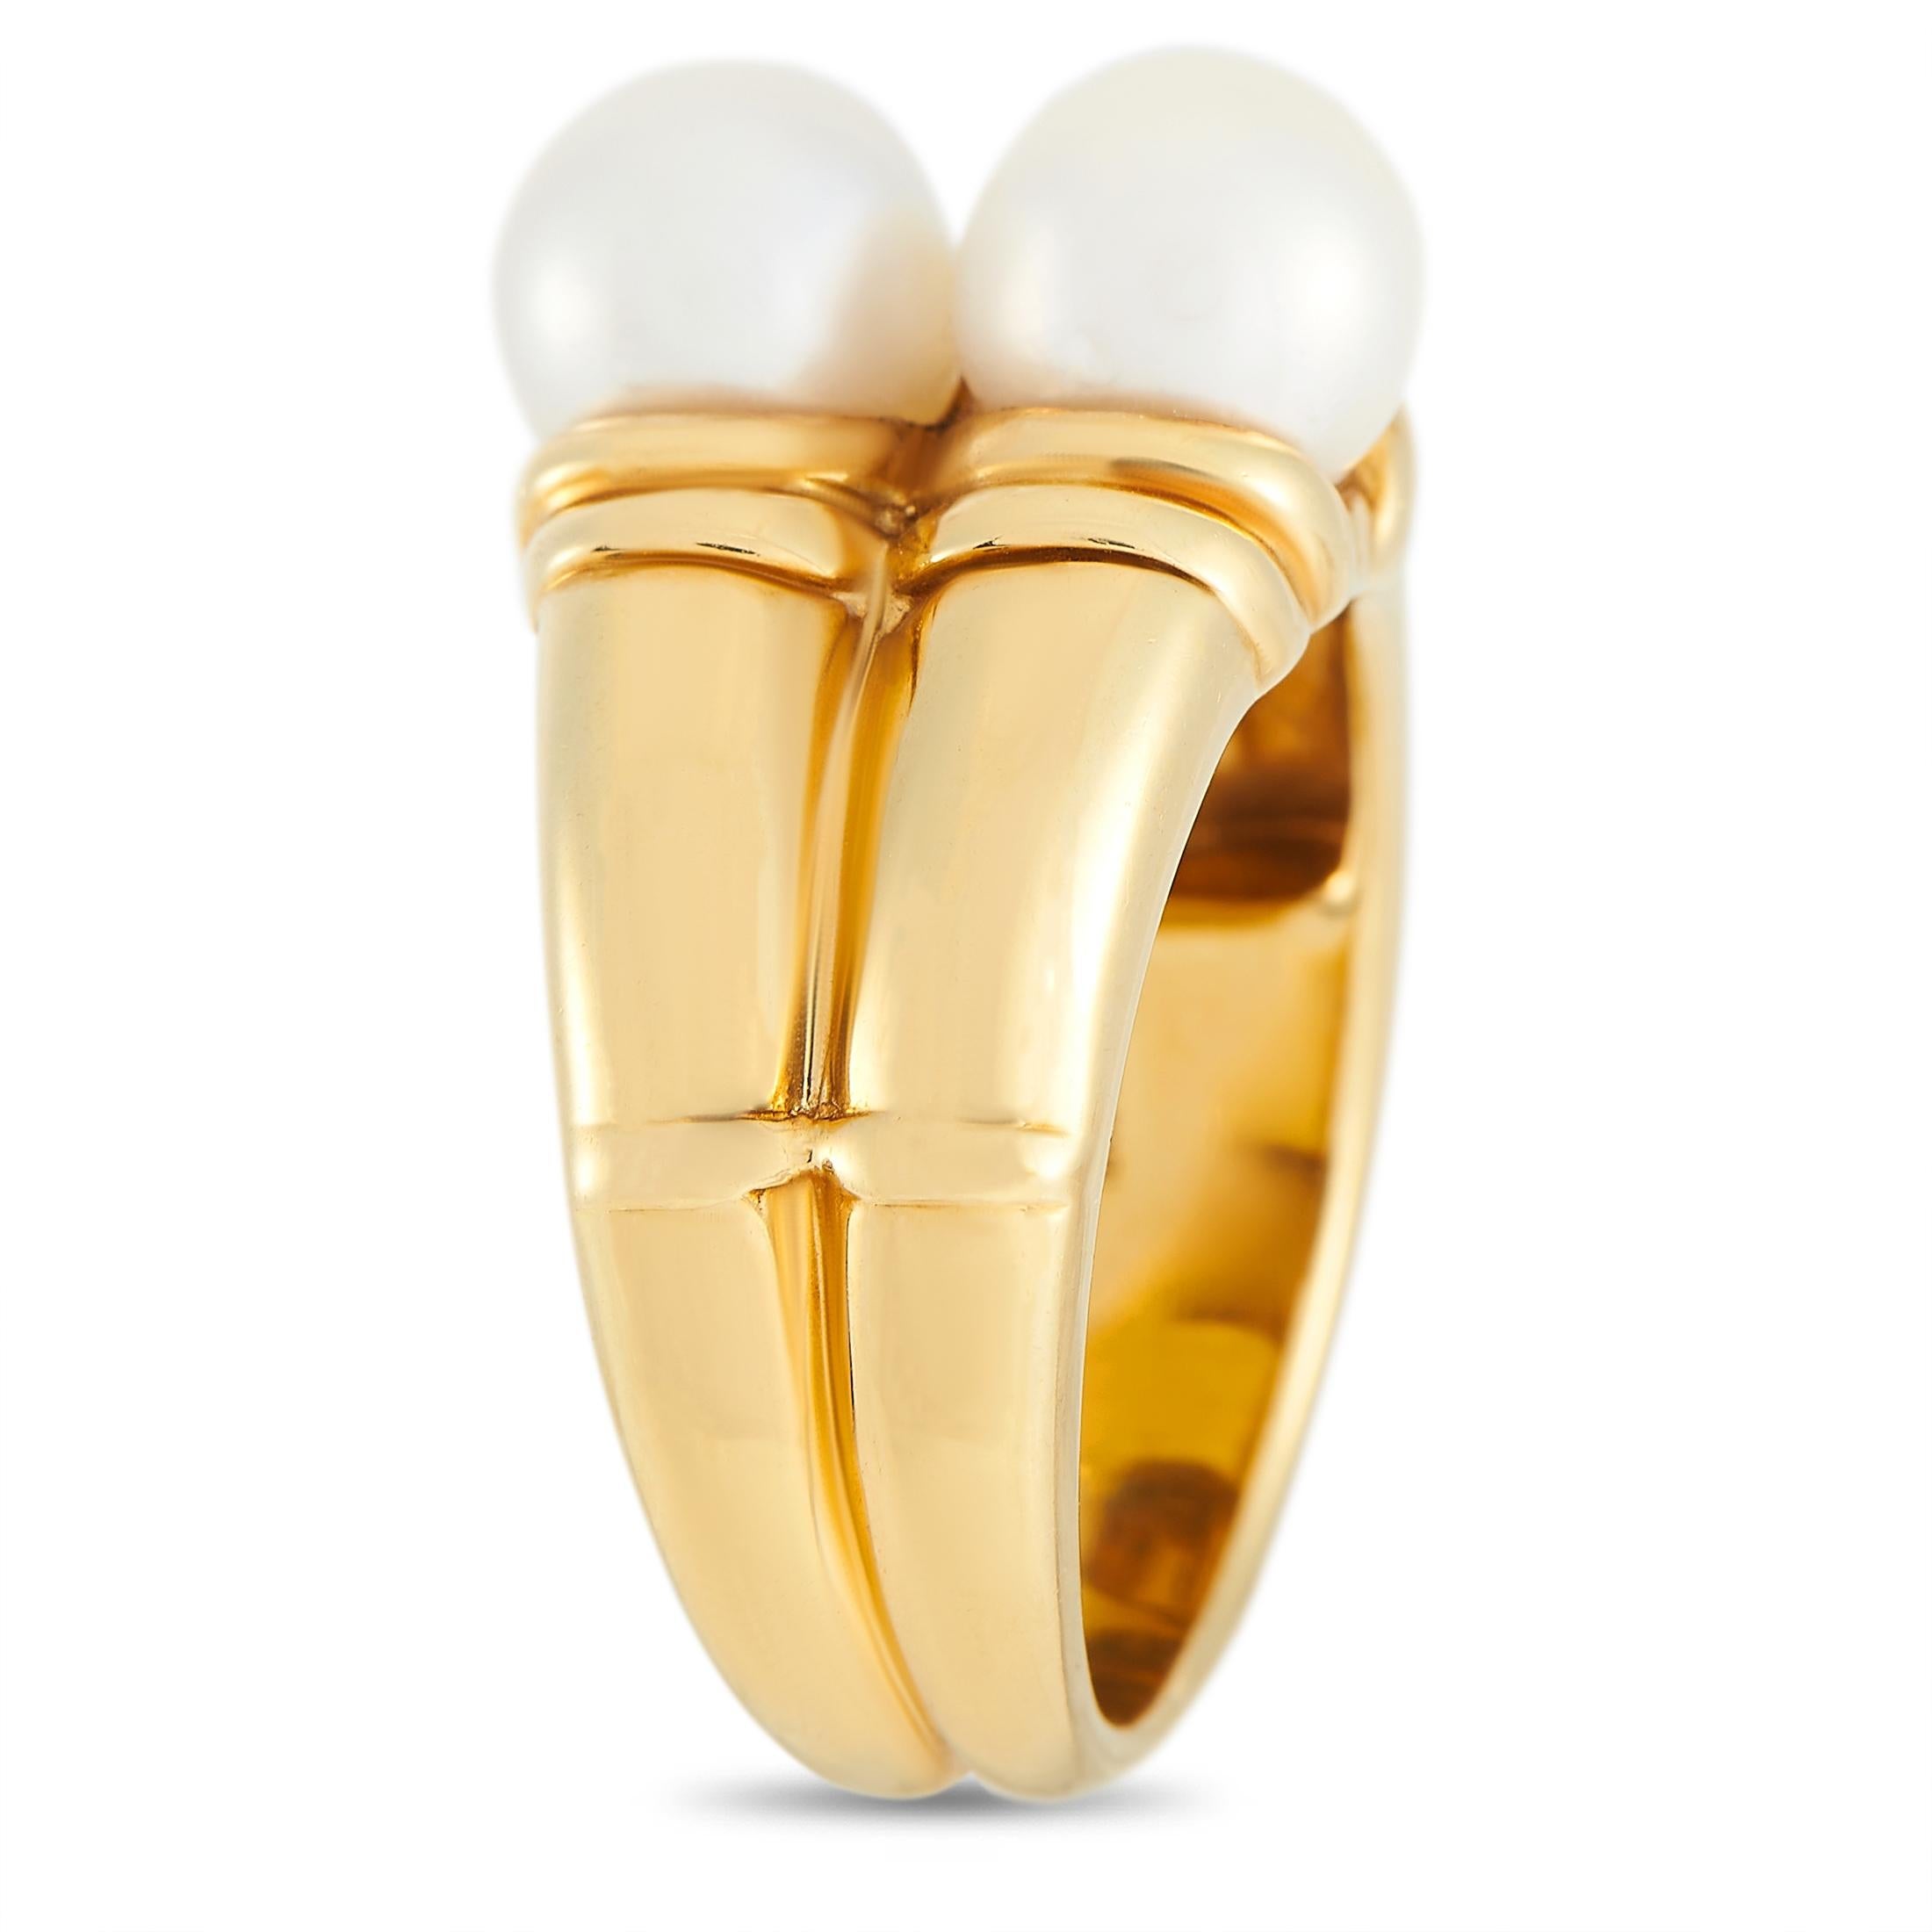 A chic, double-layered design makes this opulent Bvlgari ring anything but ordinary. The breathtaking band is crafted from 18K yellow gold and measures 5mm wide. At the center, a pair of twin pearls give this stylish piece its impressive 7mm top